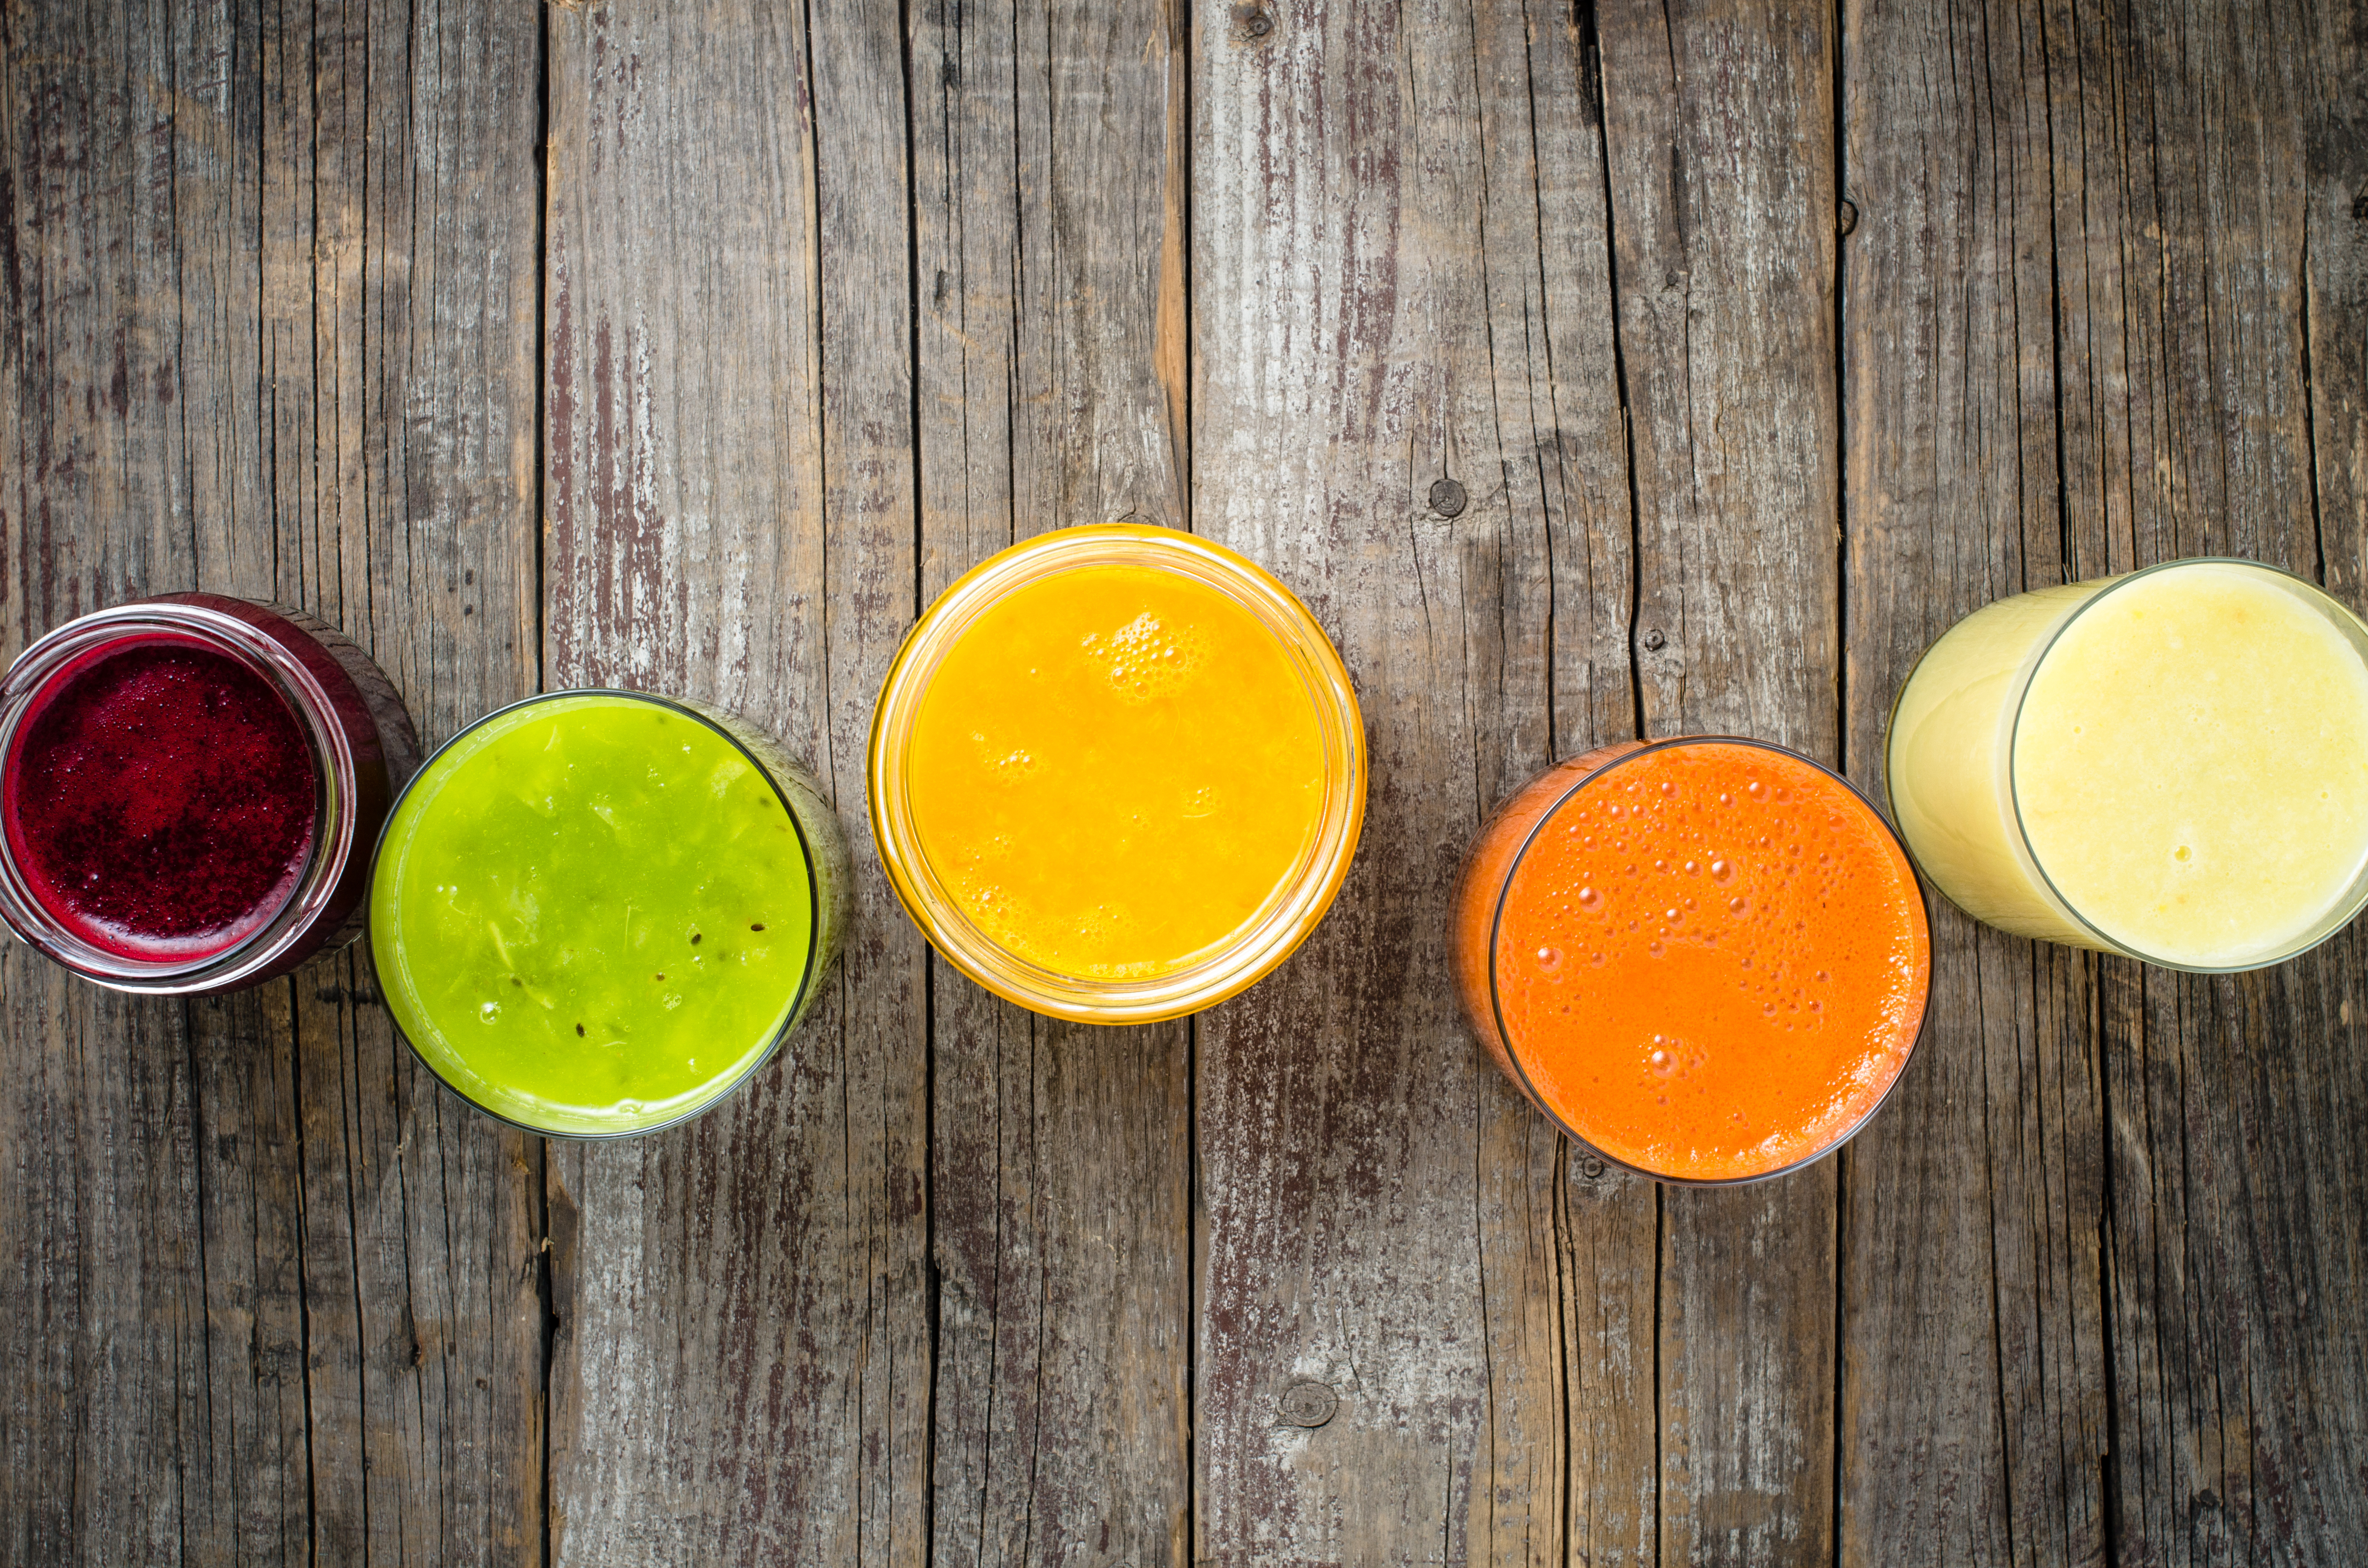 Juice Industry Booms, Yet Americans Aren’t Eating Enough Fruits and Veggies